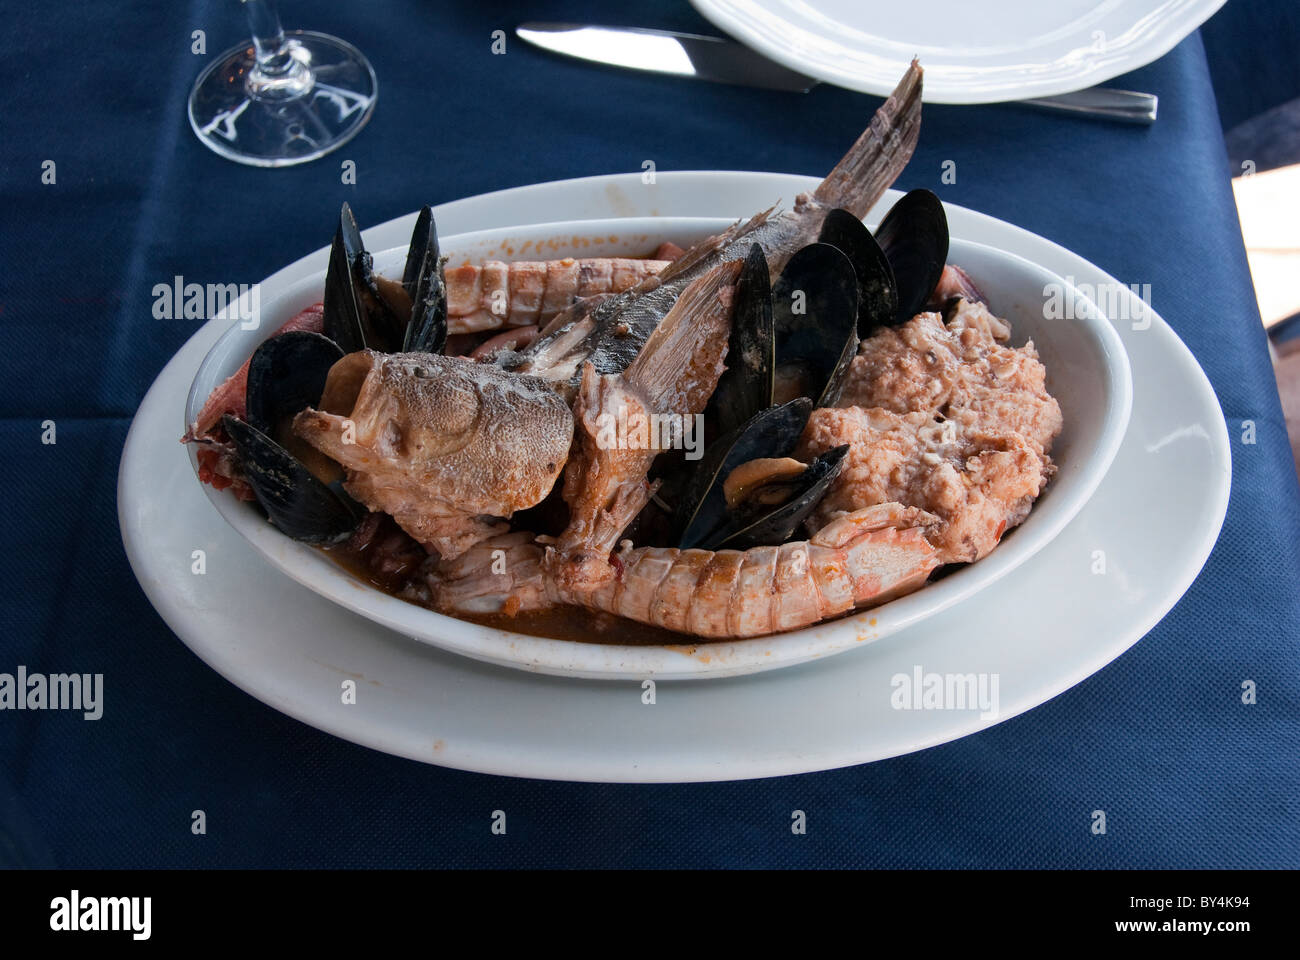 Livorno fish stew known as “Cacciucco” containing five different kinds of fish served in a soup dish Stock Photo